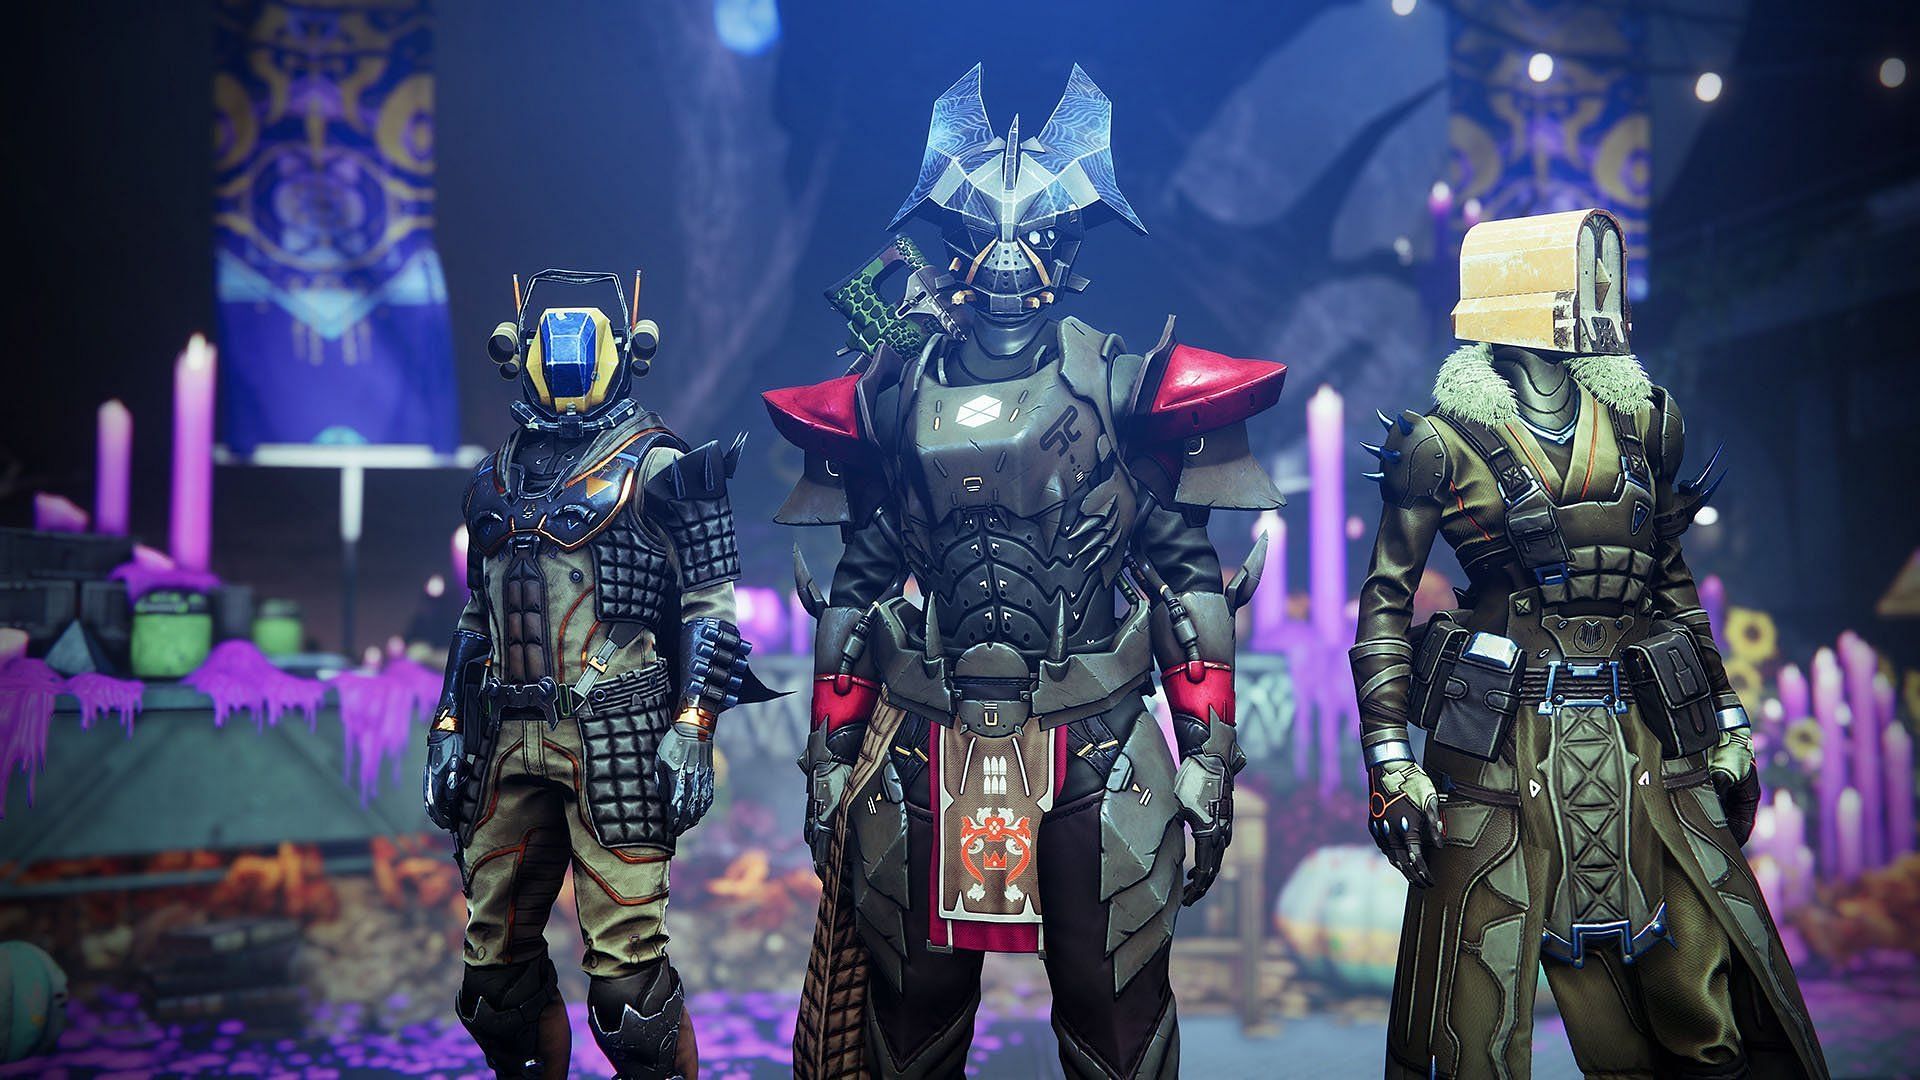 Festival of the Lost armor set for Destiny 2 